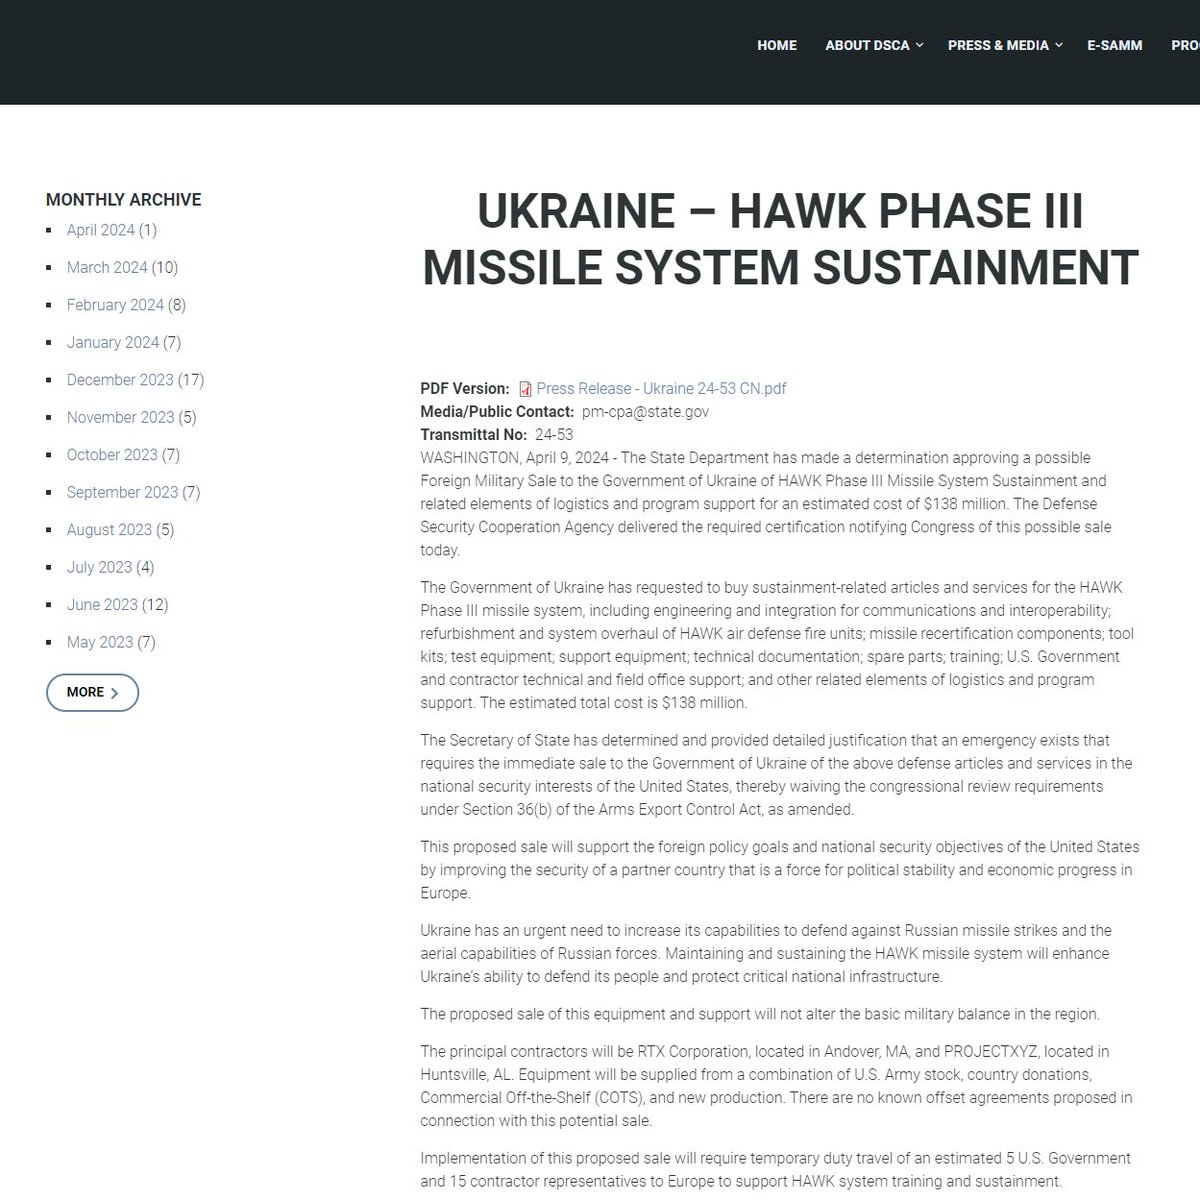 . @StateDept 🇺🇸 authorizes an emergency Foreign Military Sales #FMS case to 🇺🇦 #Ukraine for Hawk Phase III Missile System sustainment with an estimated cost of $138 million #FMSUpdate-tinyurl.com/yj6a9wzf